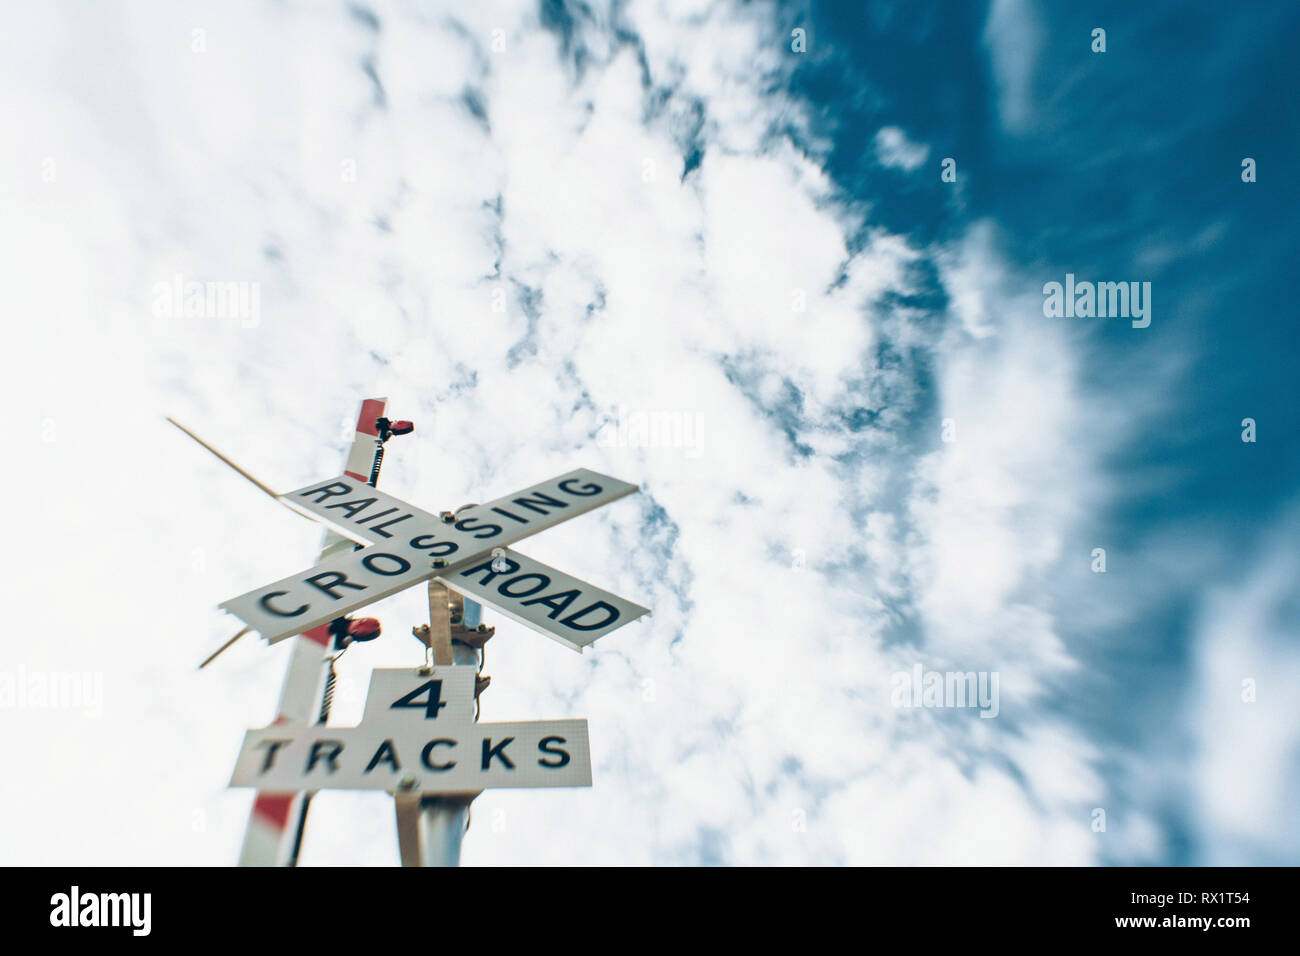 Low angle view of railroad track and crossing sign against cloudy sky Stock Photo